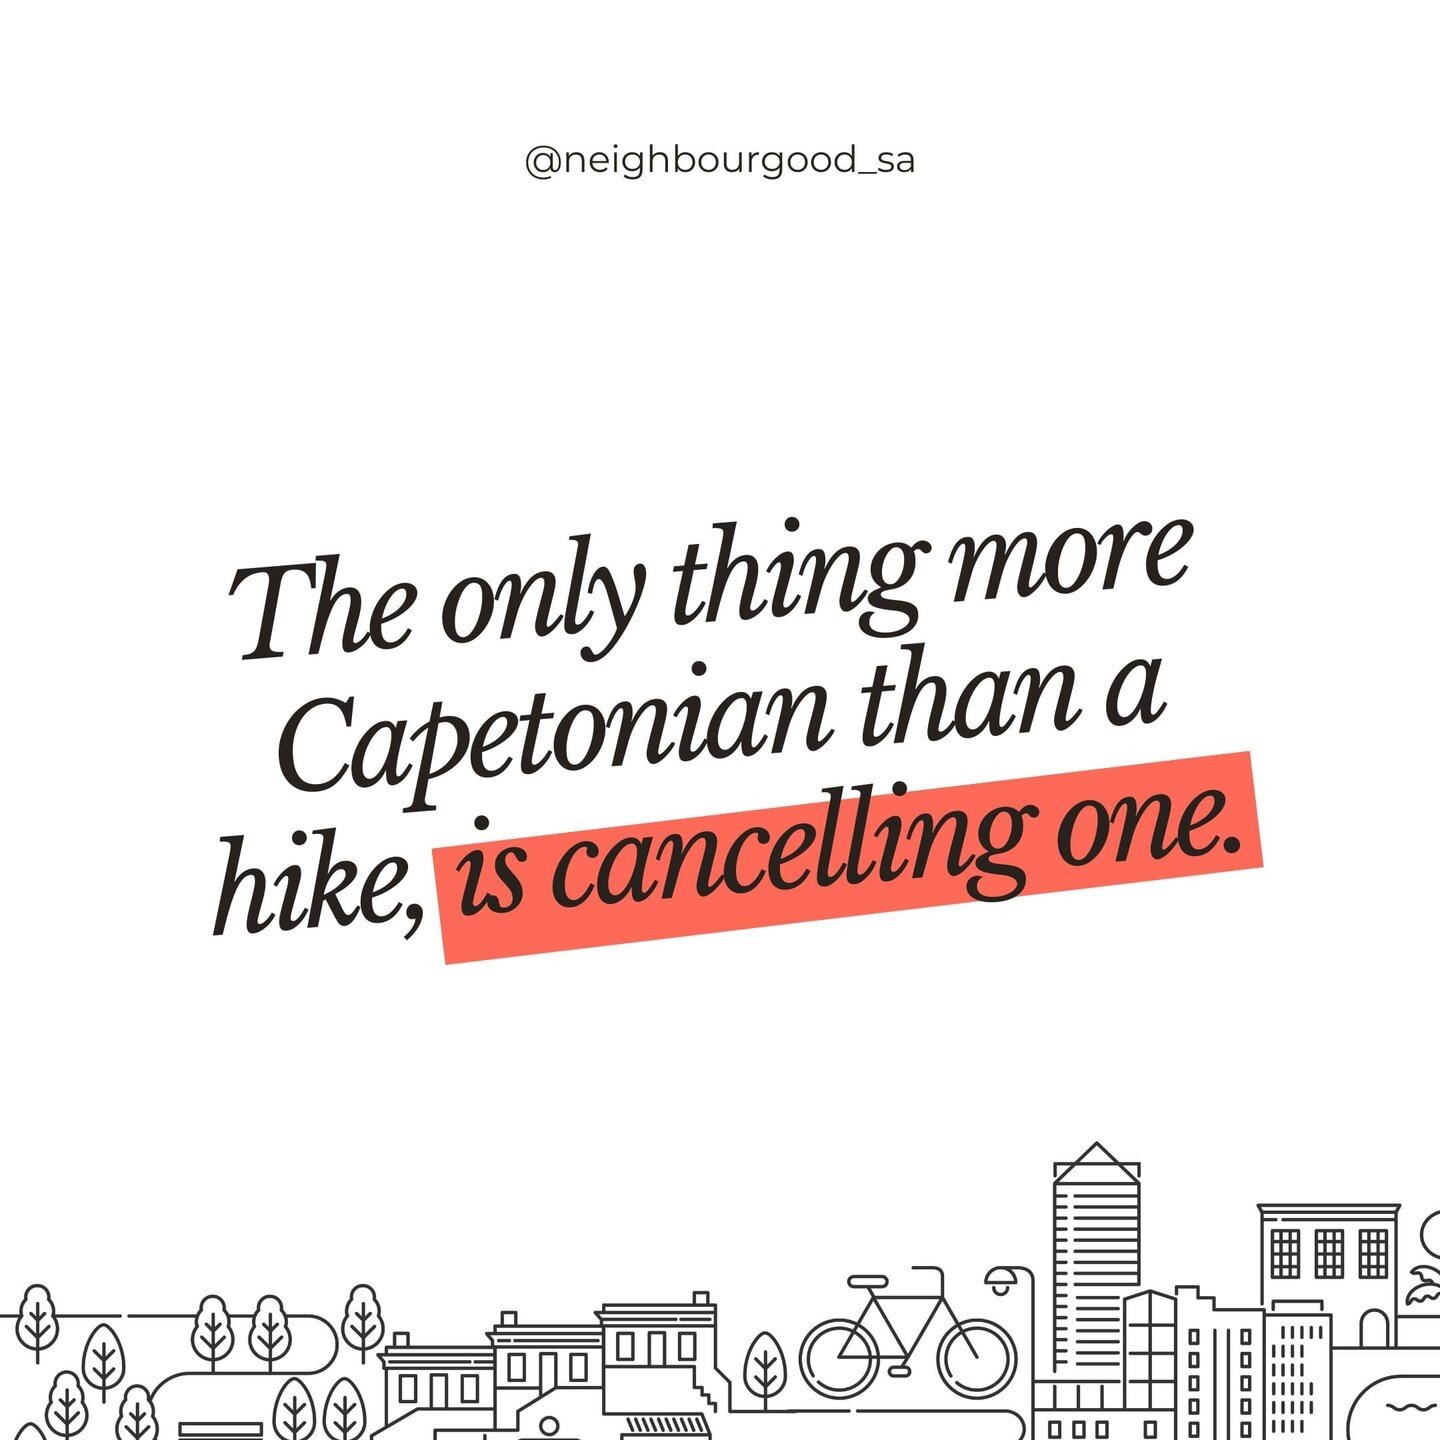 What&rsquo;s the problem, though? Lion&rsquo;s Head isn&rsquo;t going anywhere 👀
.
.
.
.
#neighbourgood #neighbourgoodsa #neighbourgoodguide #capetownliving #capetownlife #capetownbest #capetownvibes #capetownlove #capetownproperty #capetownetc #cap